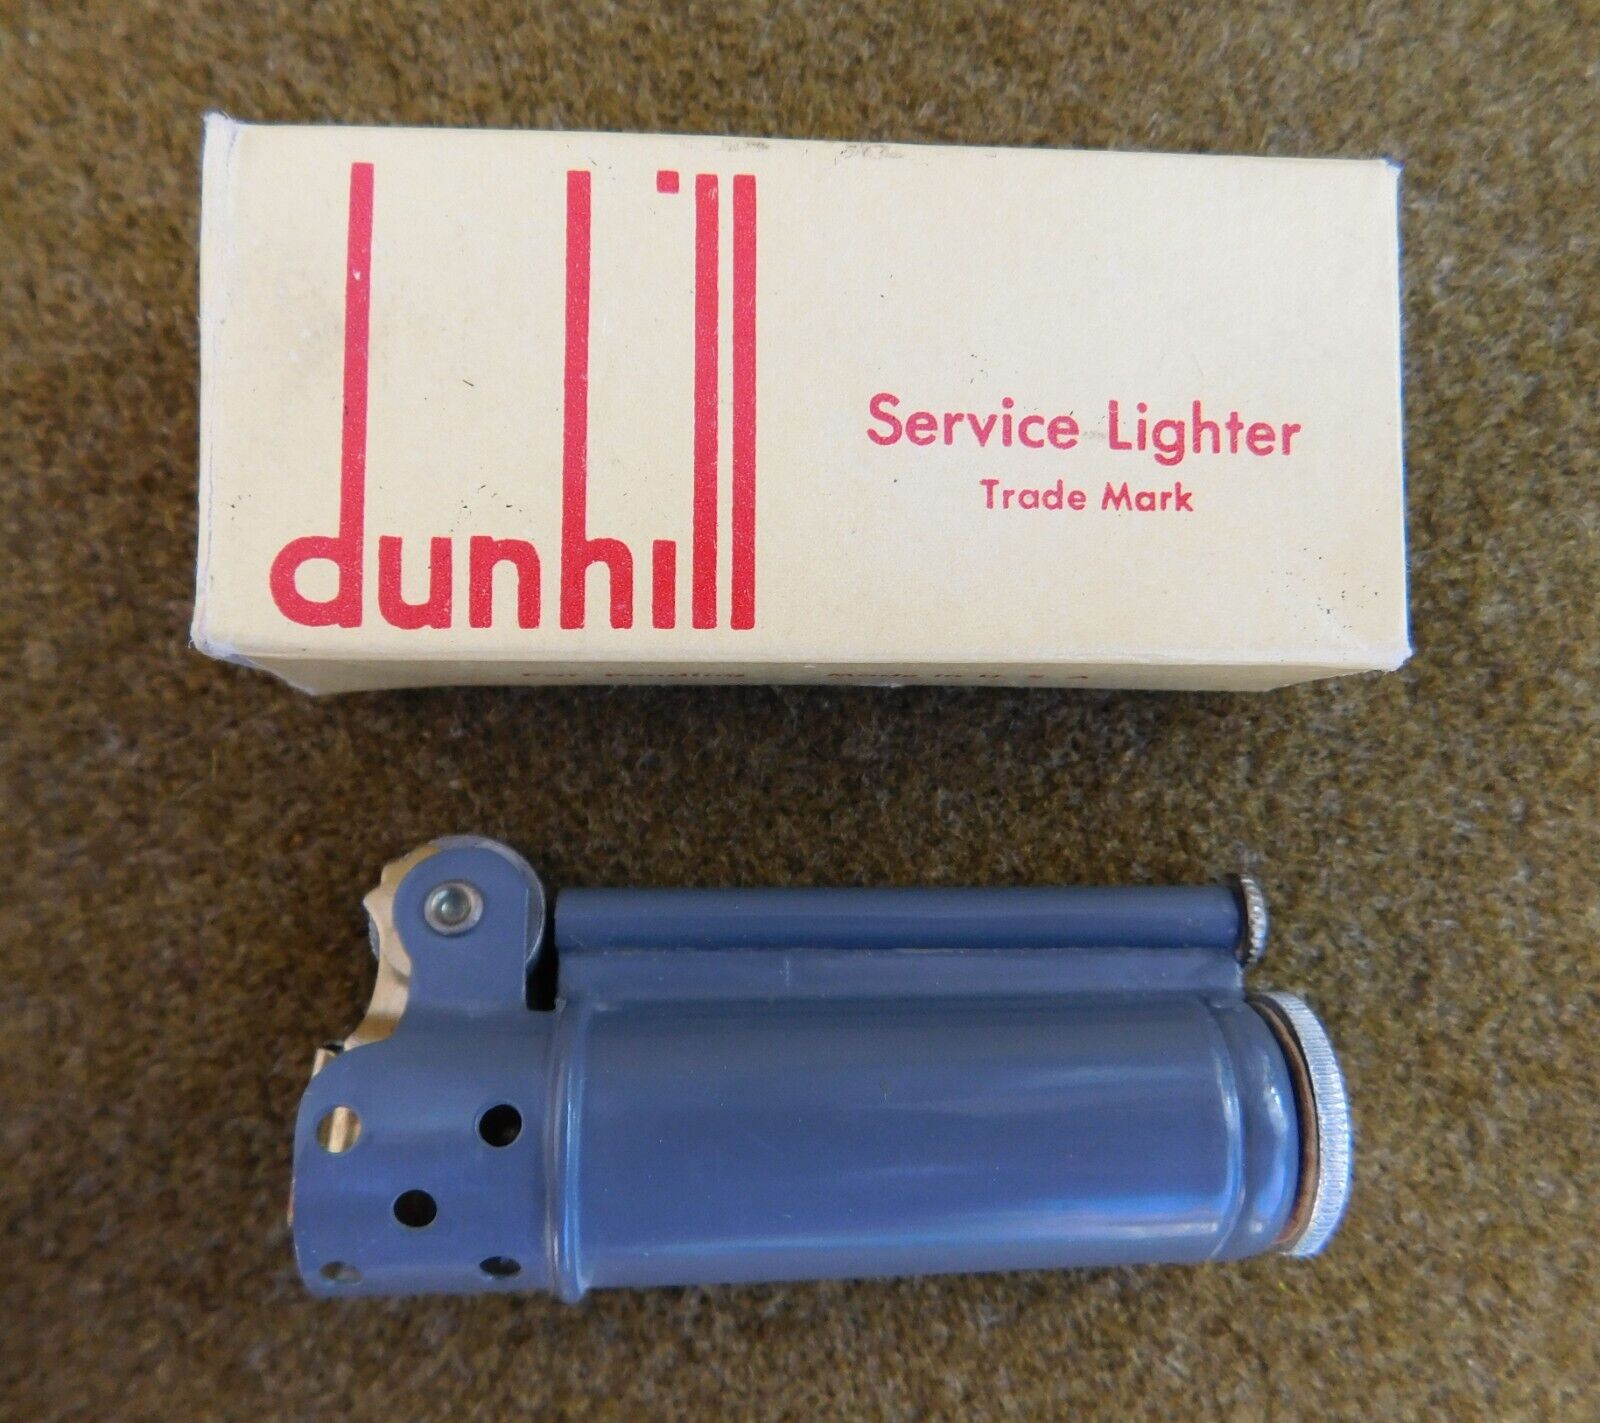 ORIGINAL WWII U.S. DUNHILL SERVICE LIGHTER IN BOX UNFIRED - GRAY